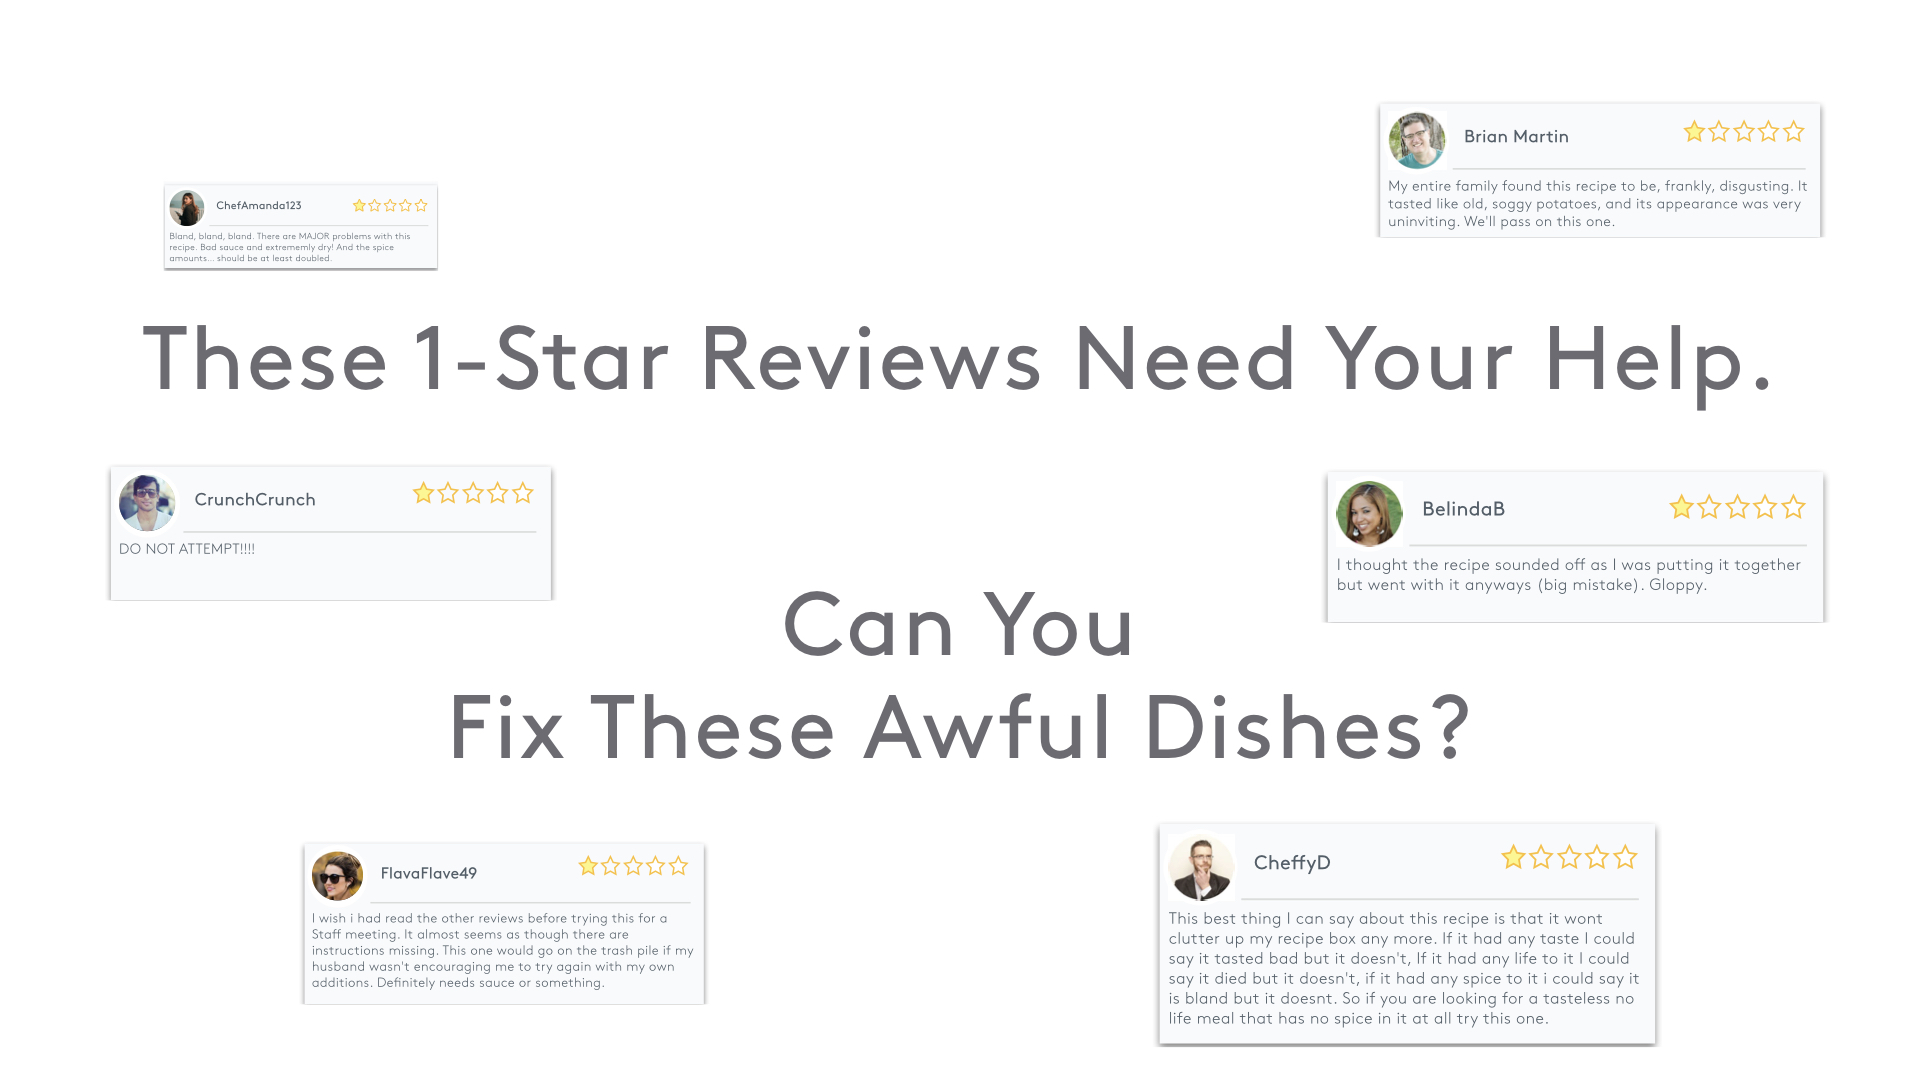 These 1-star review recipes need your help. Can you fix these awful dishes?